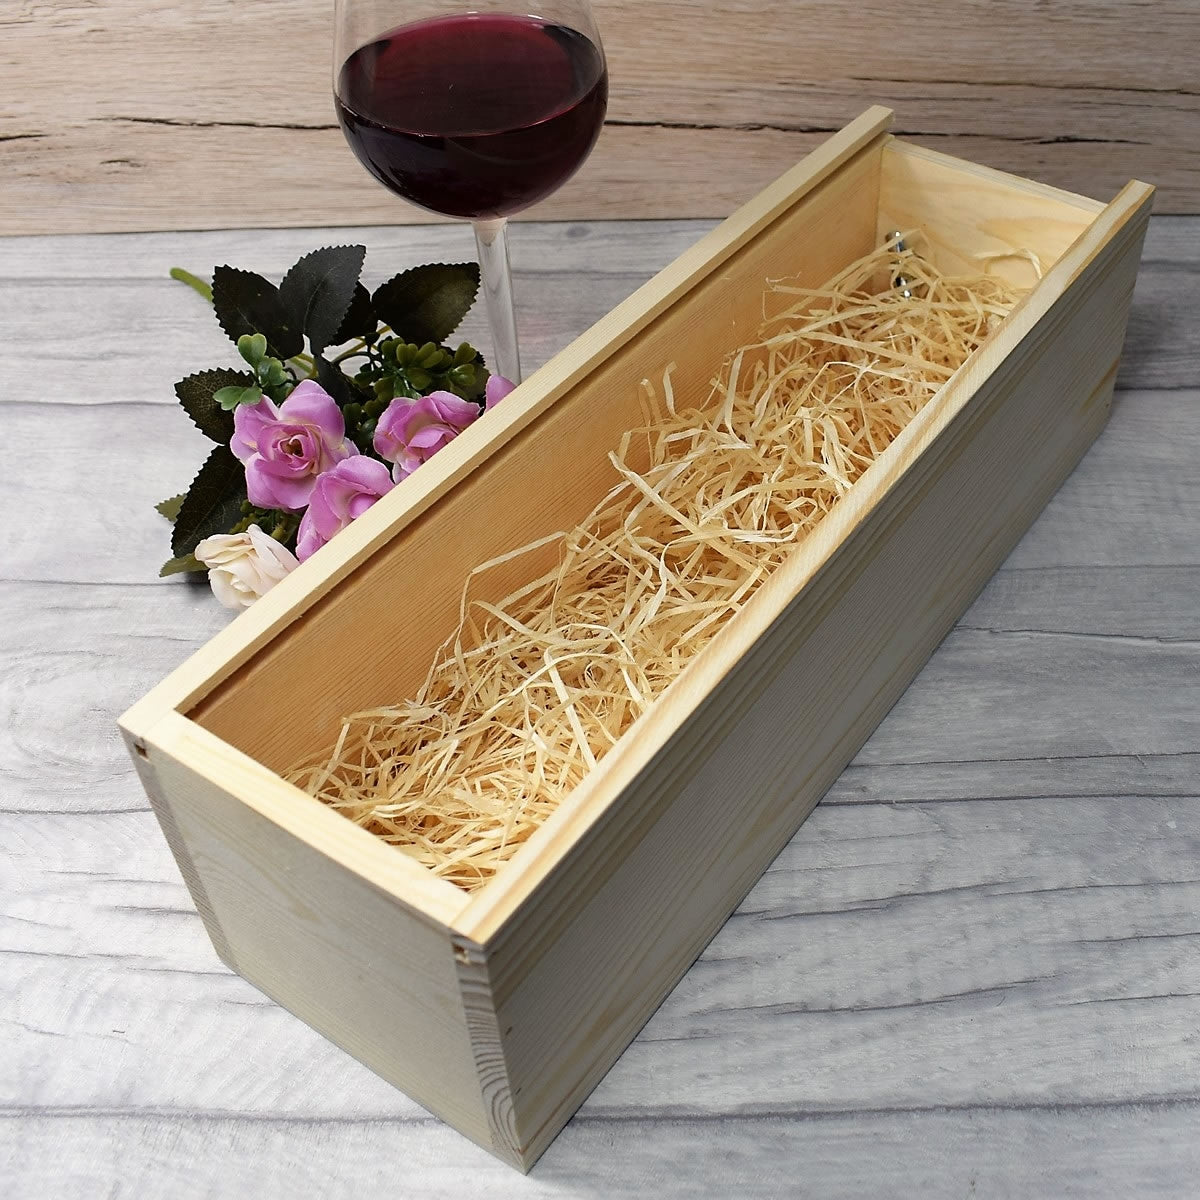 Personalised Wooden Wine Box with Clear Lid - Mr & Mrs Bride & Groom Wedding Gift